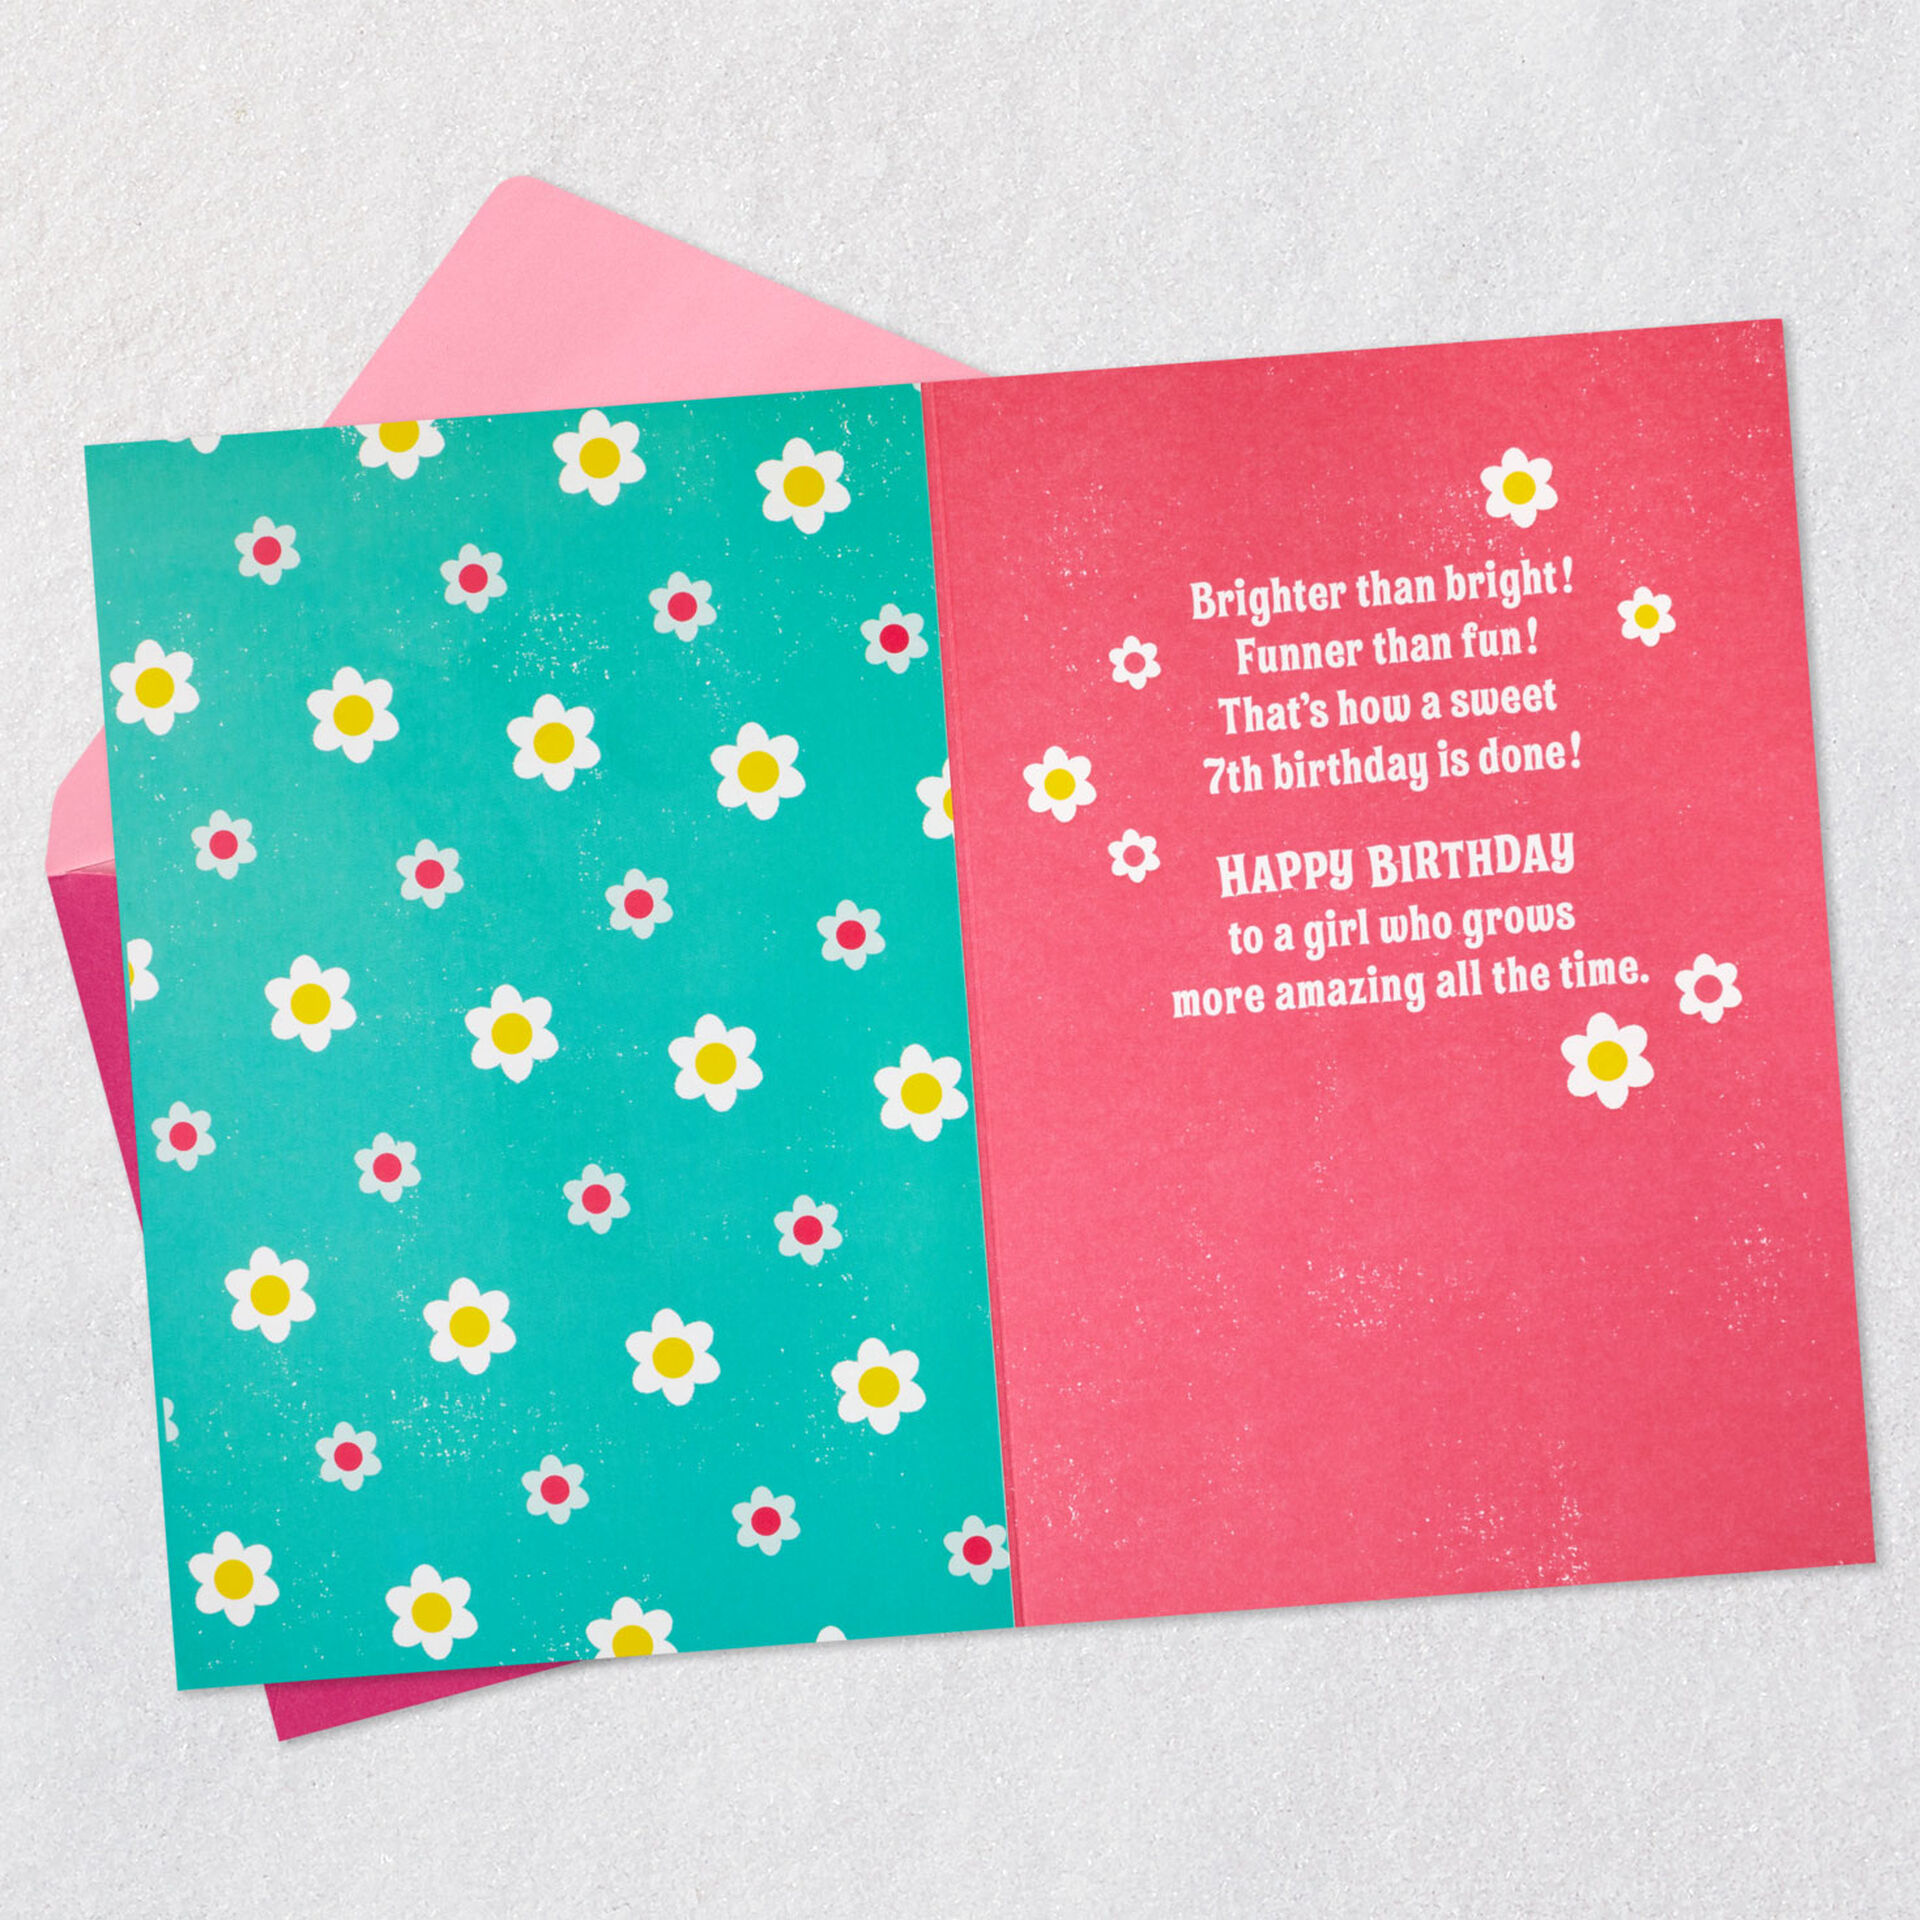 Flowers-and-Hearts-Confetti-7th-Birthday-Card-for-Her_499HKB5645_03